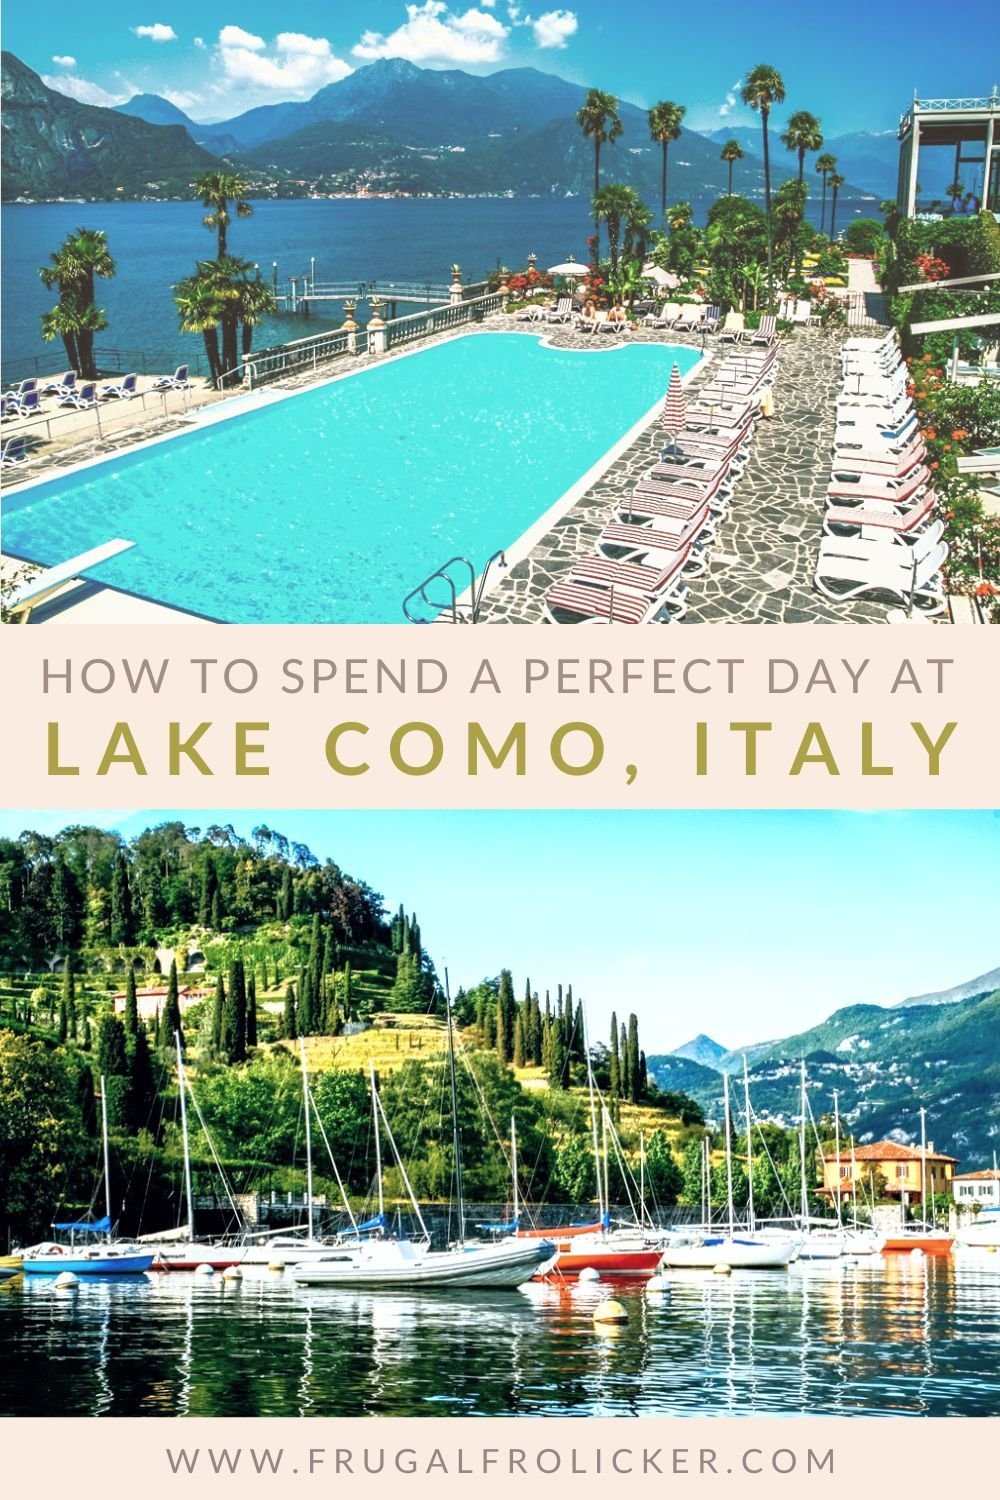 One Day in Lake Como, Italy